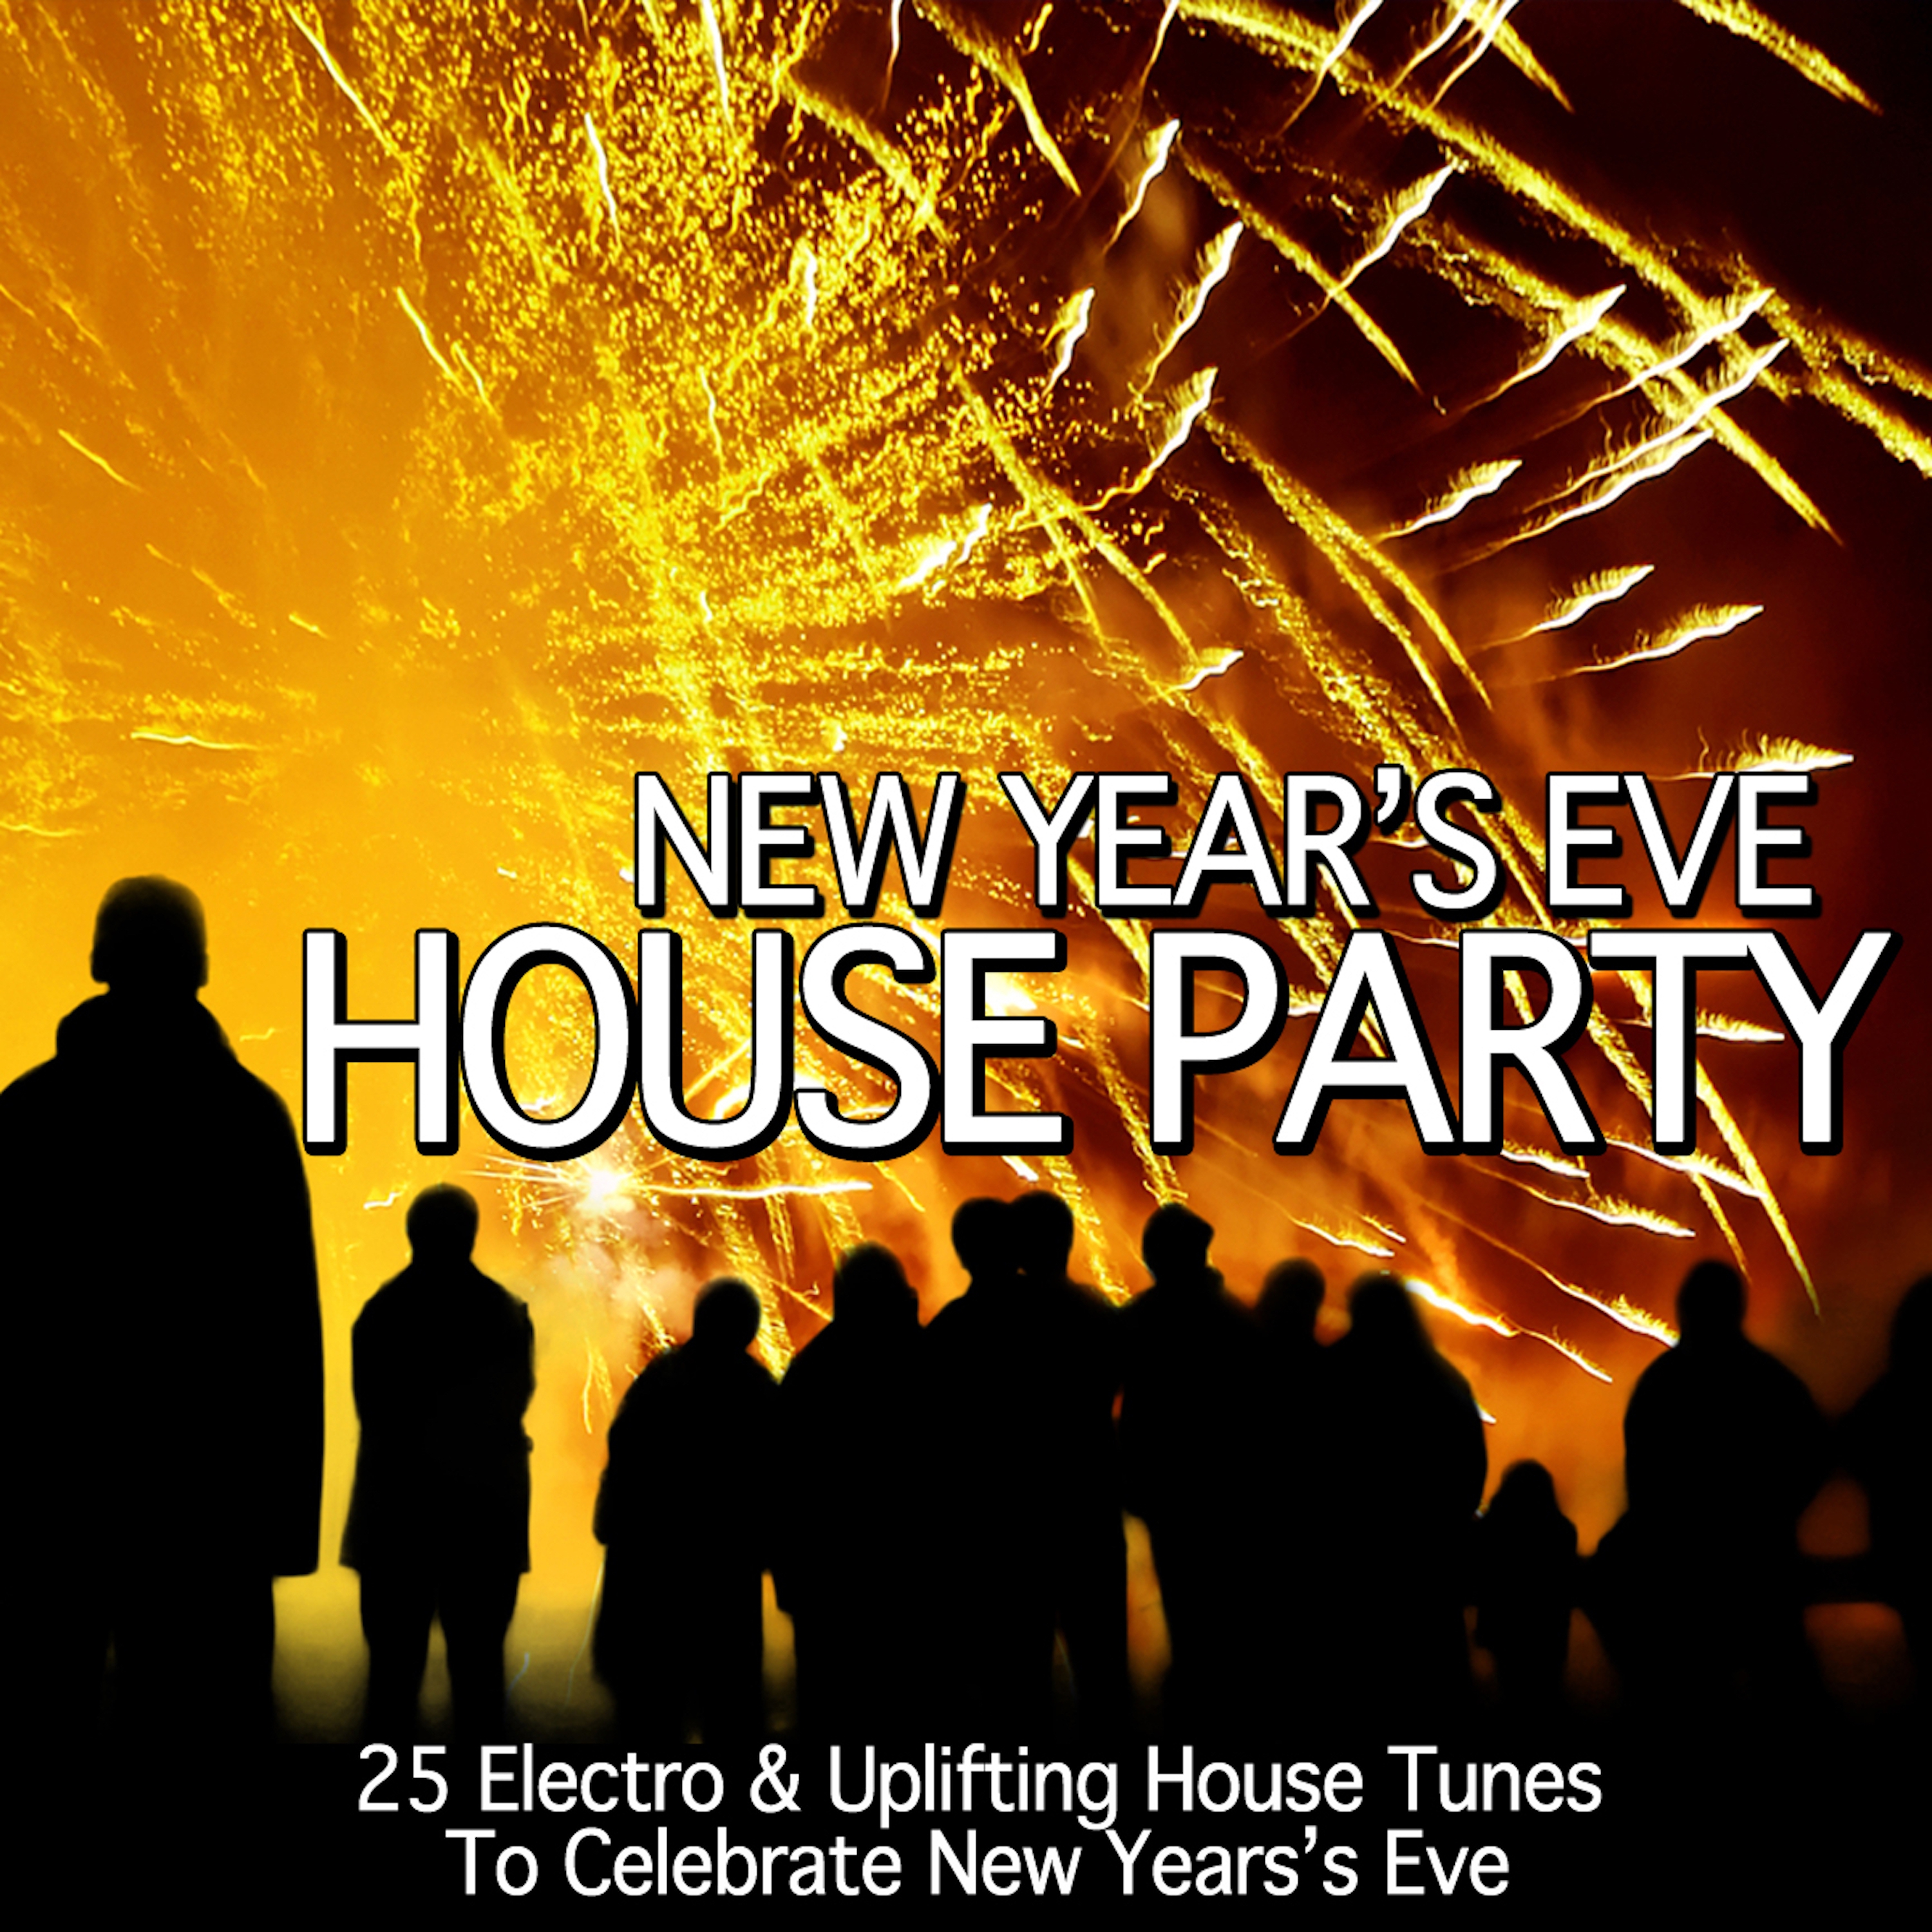 New Year's Eve House Party